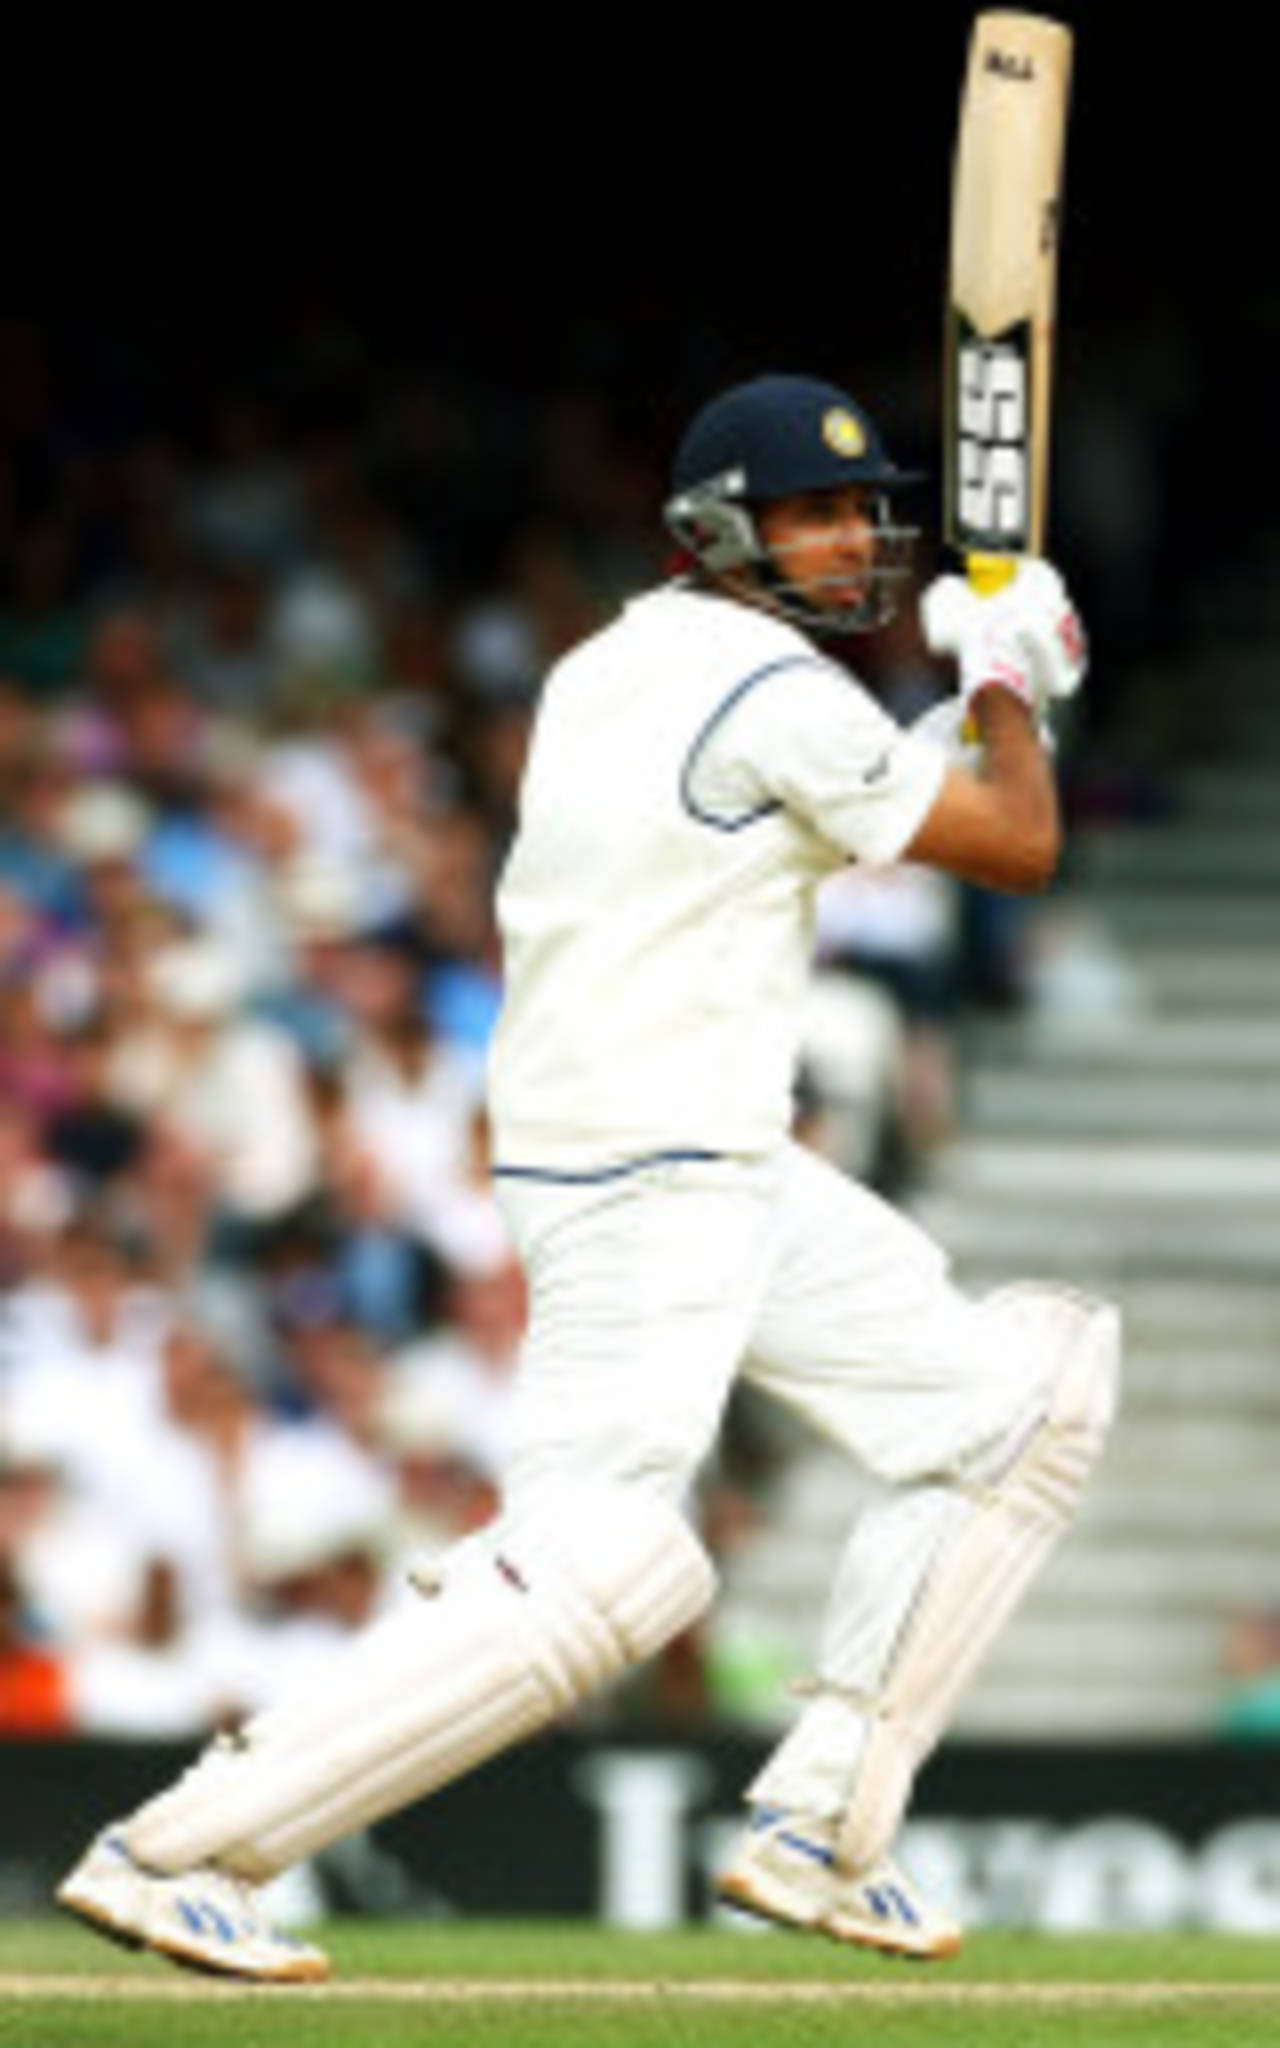 VVS Laxman played some delightful strokes in his unbeaten 46, England v India, 3rd Test, The Oval, 4th day, August 12, 2007